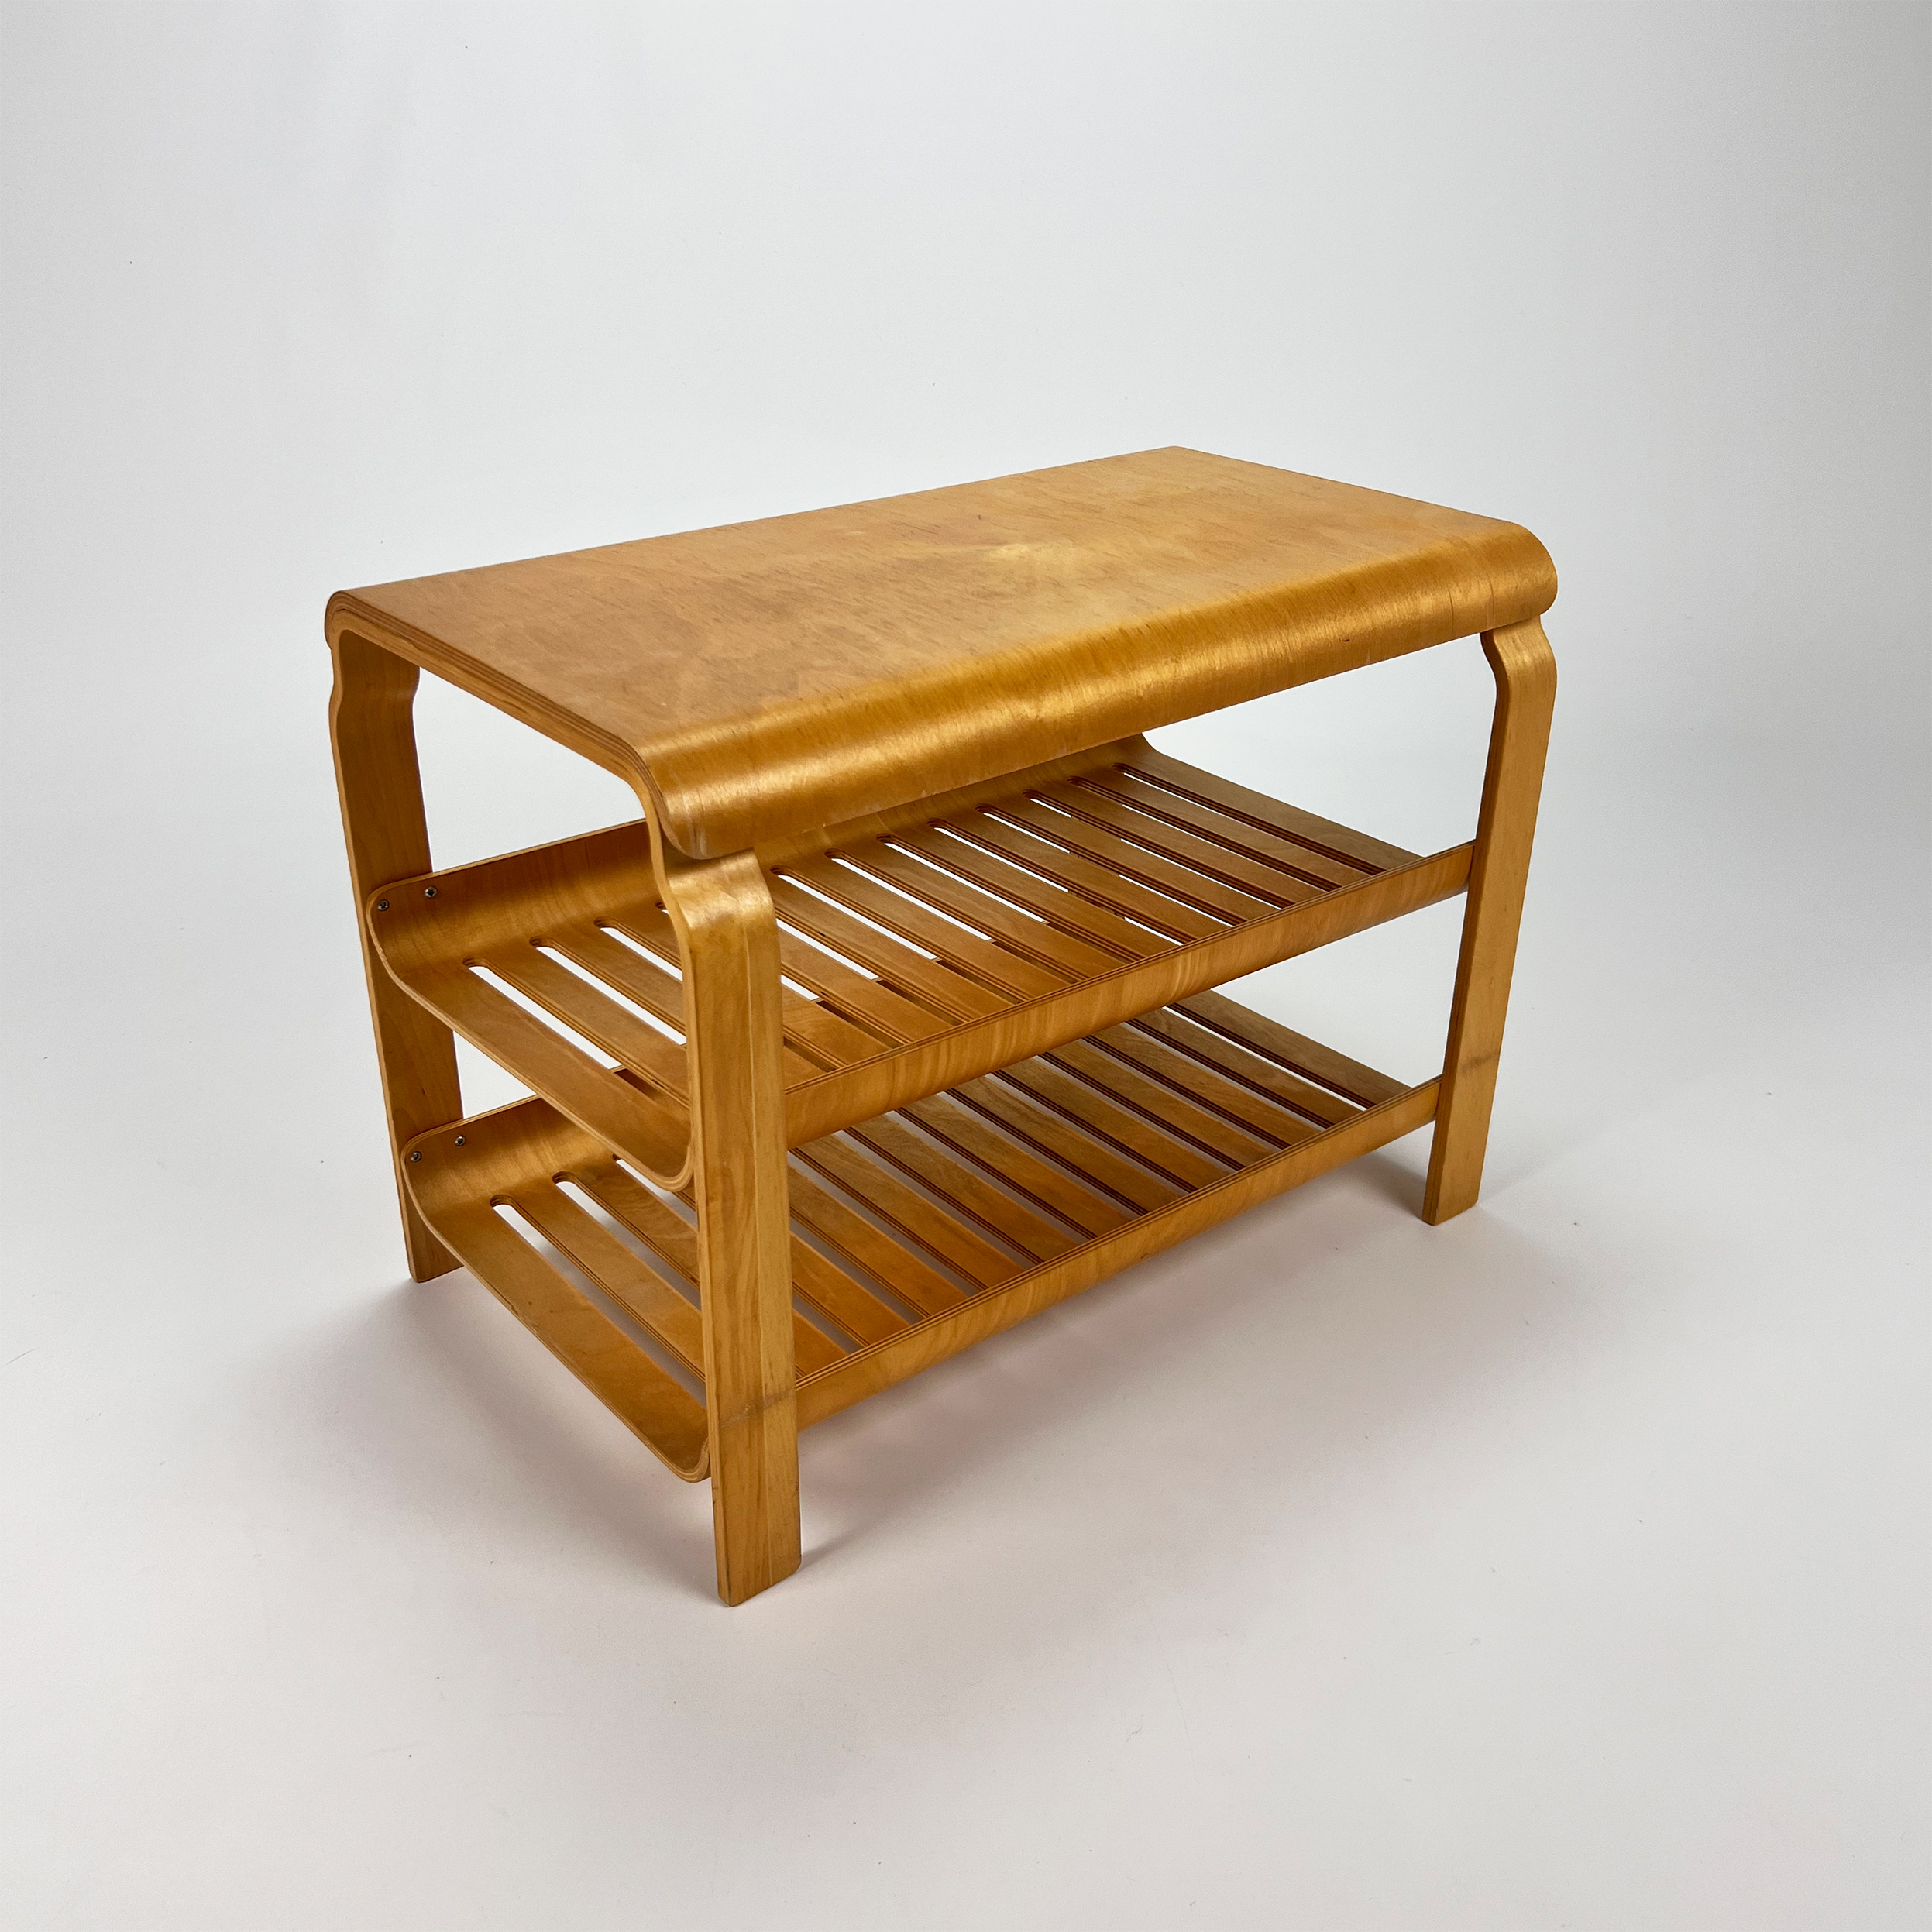 Ikea, a folding table, possibly a prototype from the Tomorrow collection  1980-90s.